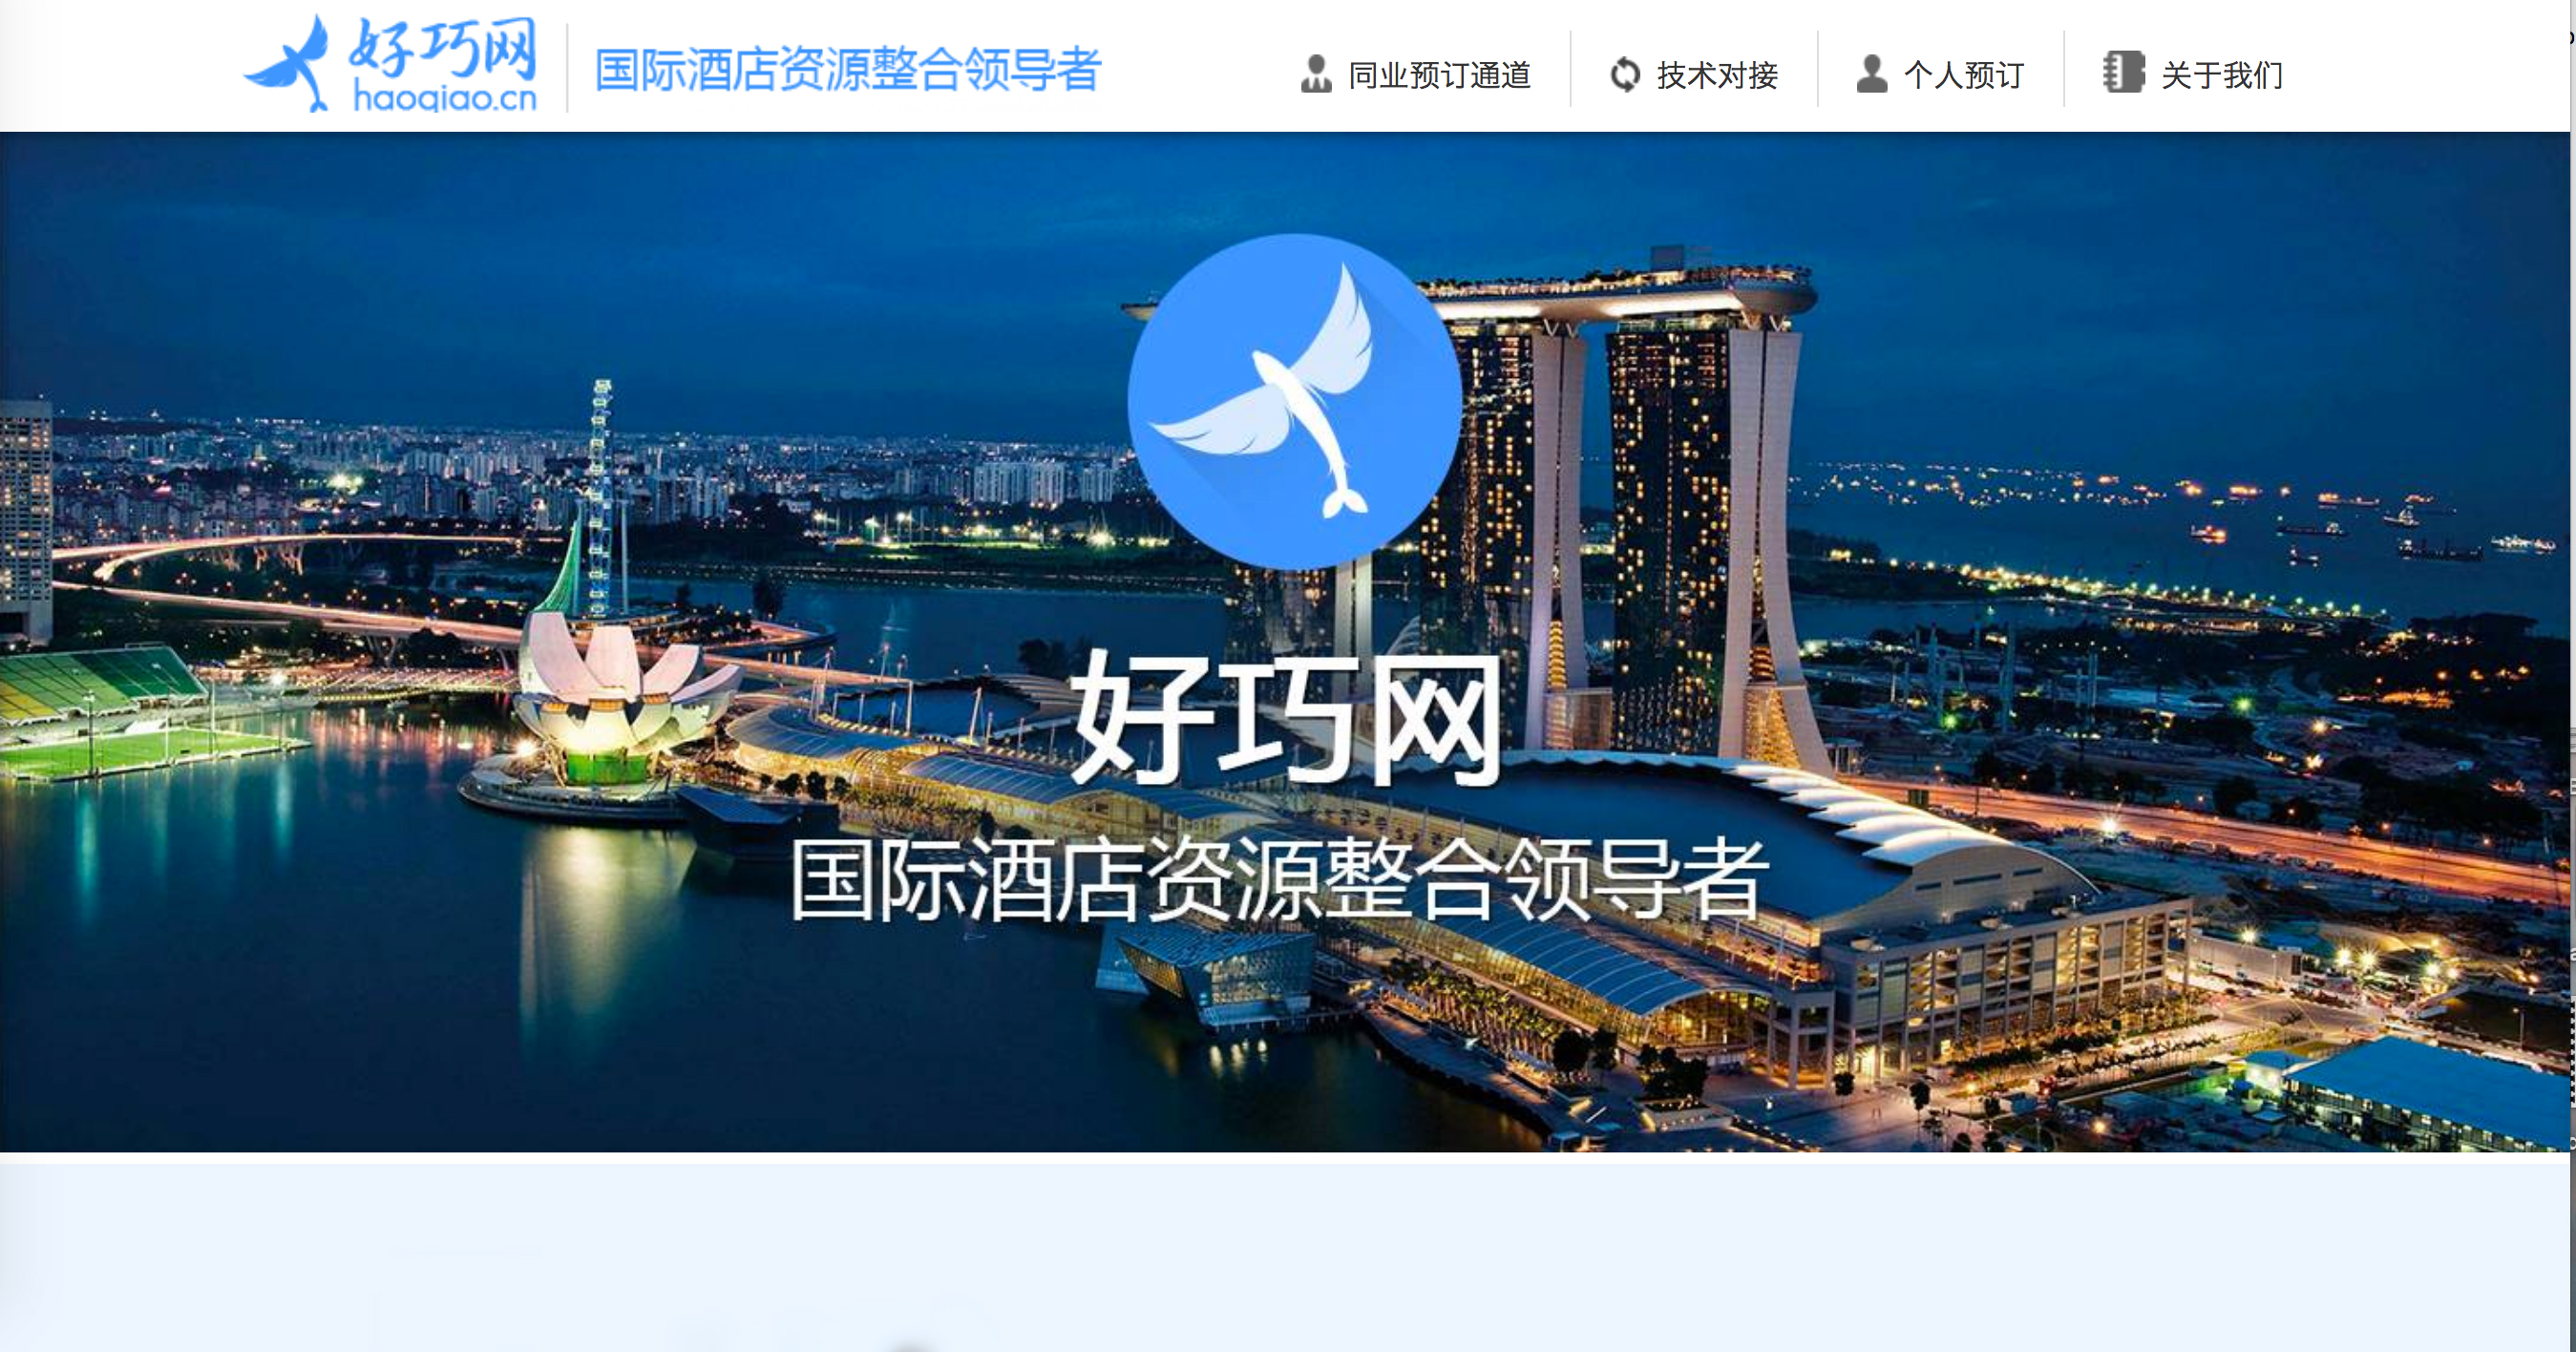 Chinas SMEs Fund invest 17 million in hotel booking platform Haoqiao